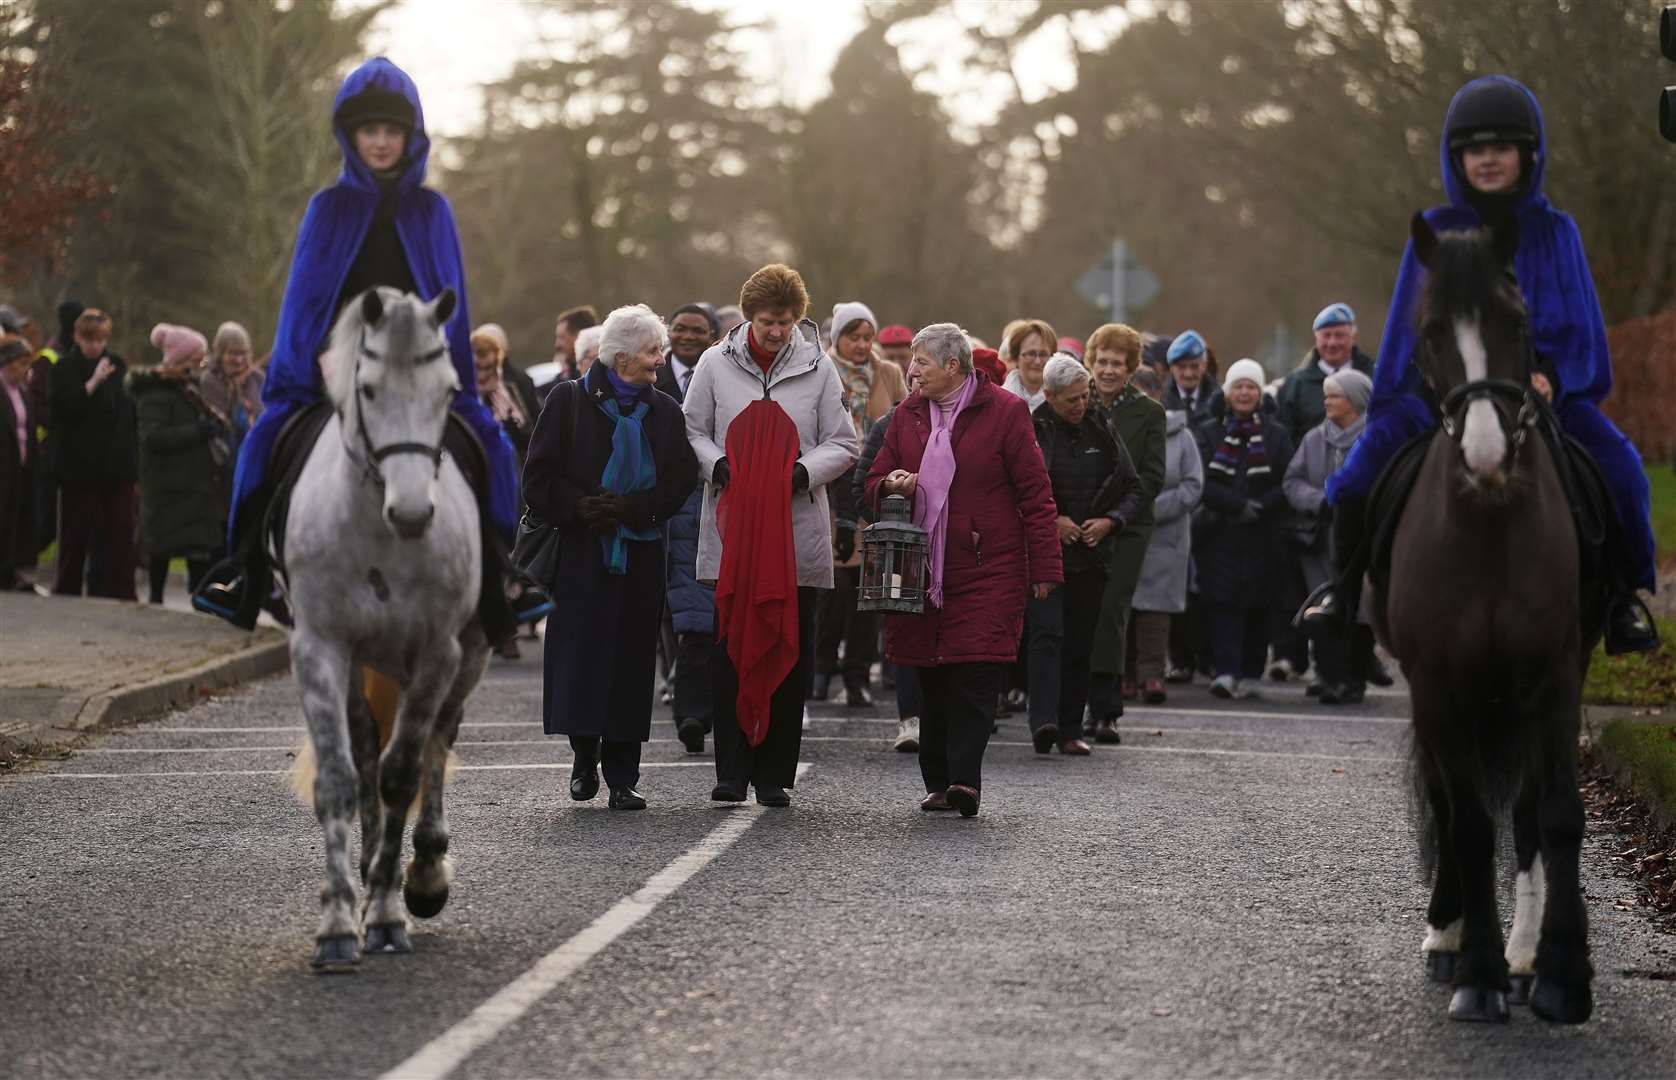 The relic of St Brigid was taken to the local church in a procession (Brian Lawless/PA)